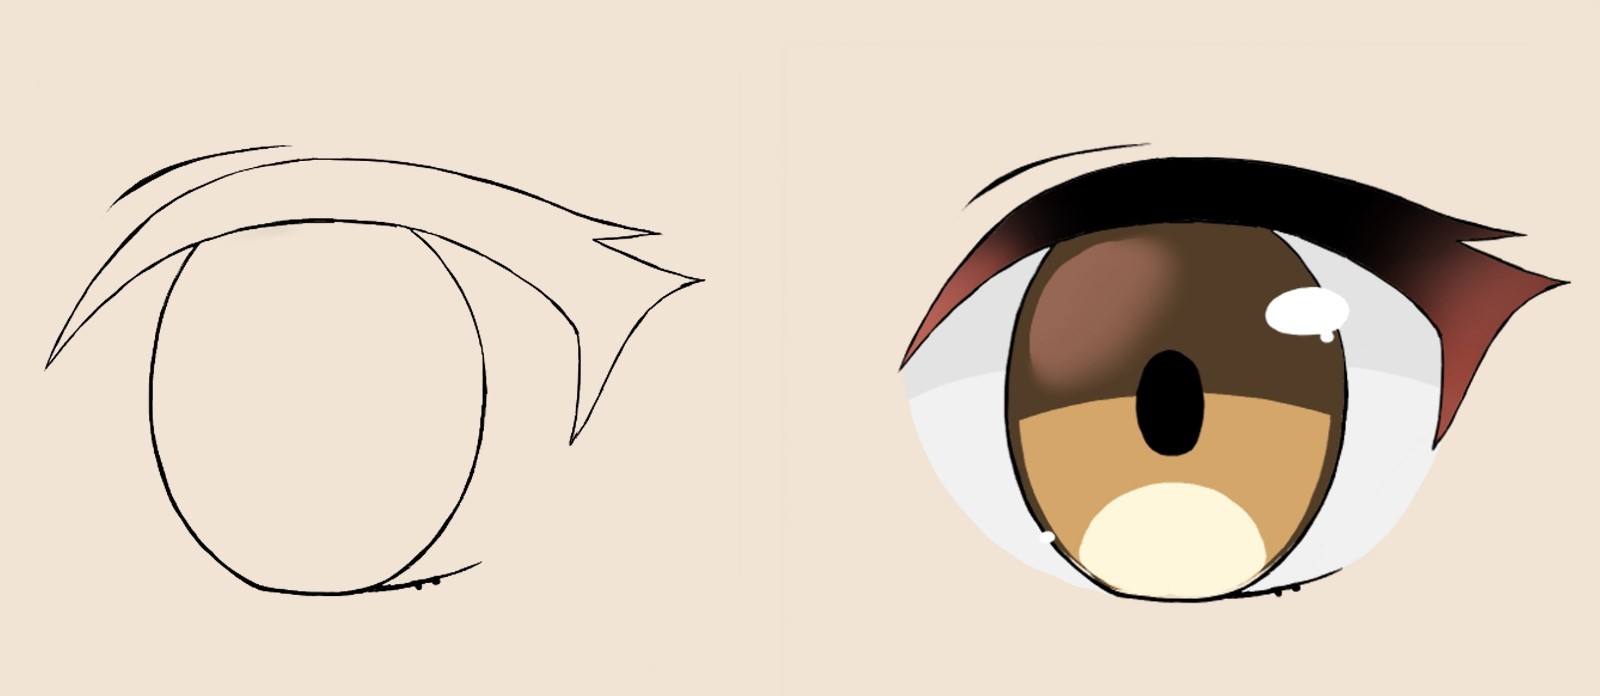 How to draw animes eyes closed  Simple Drawing Ideas 